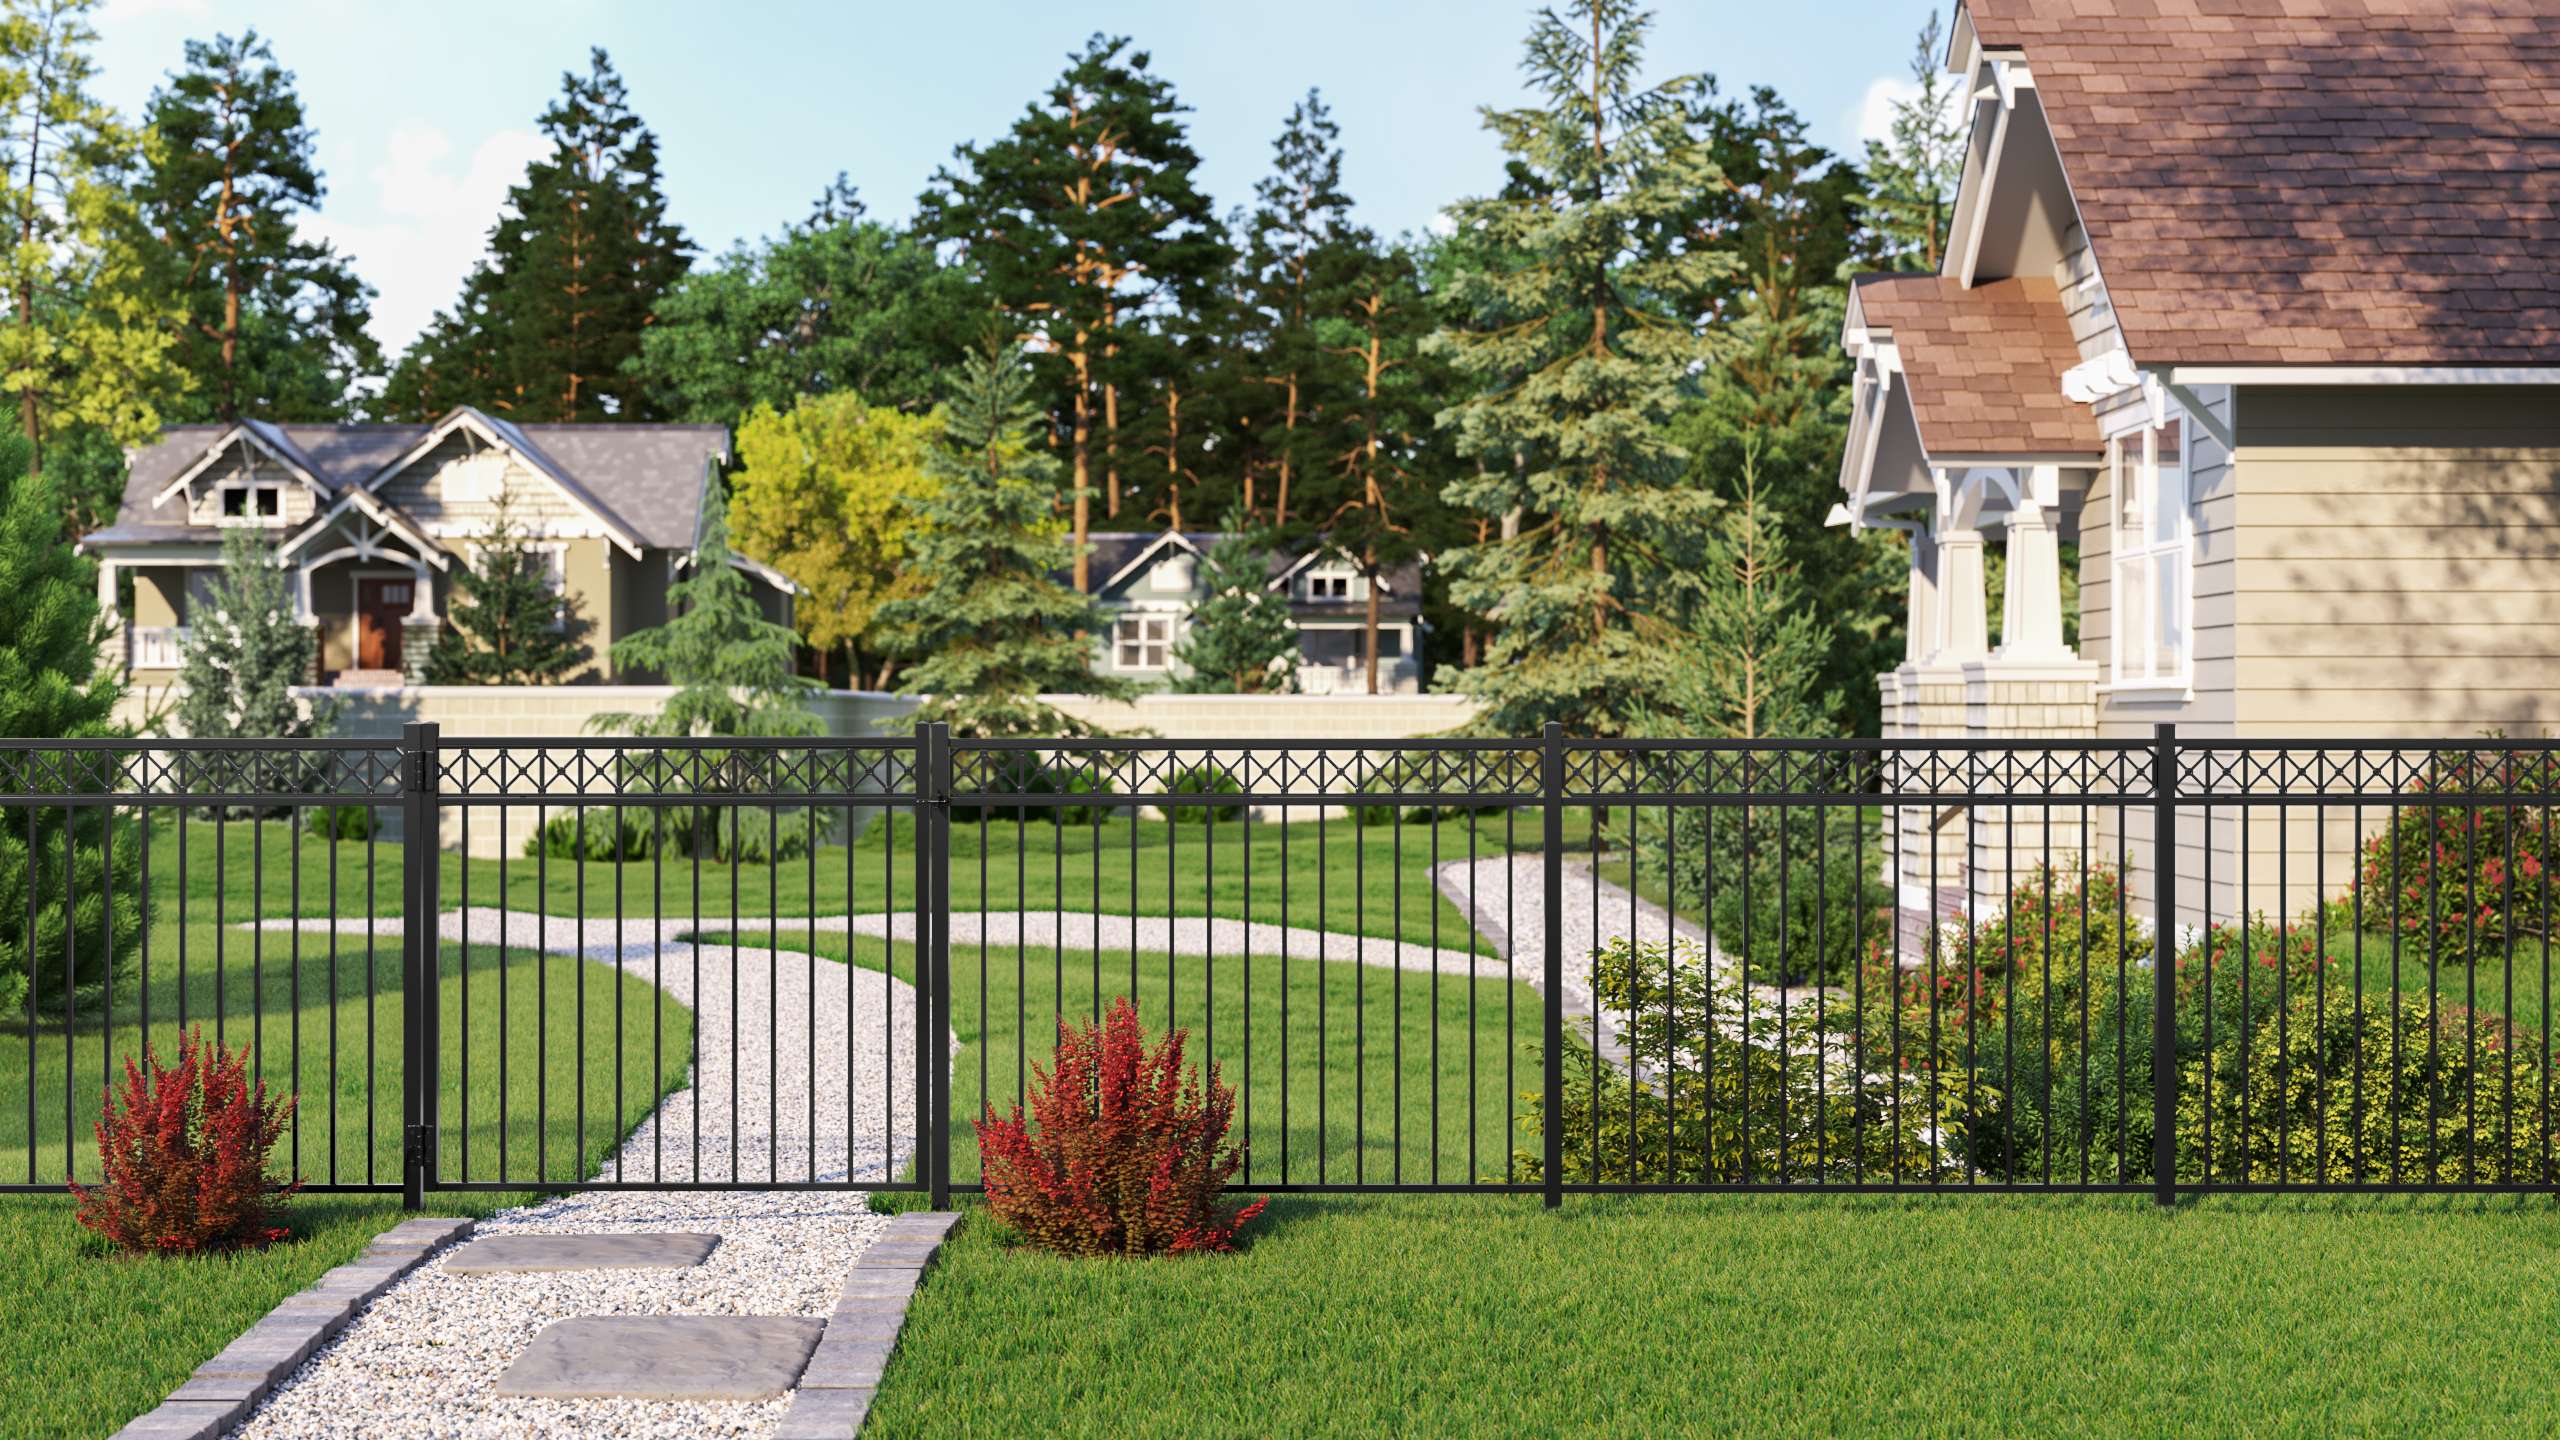 A yard in a modern development with green grass, adorned with a Flint Active Yards aluminum fence